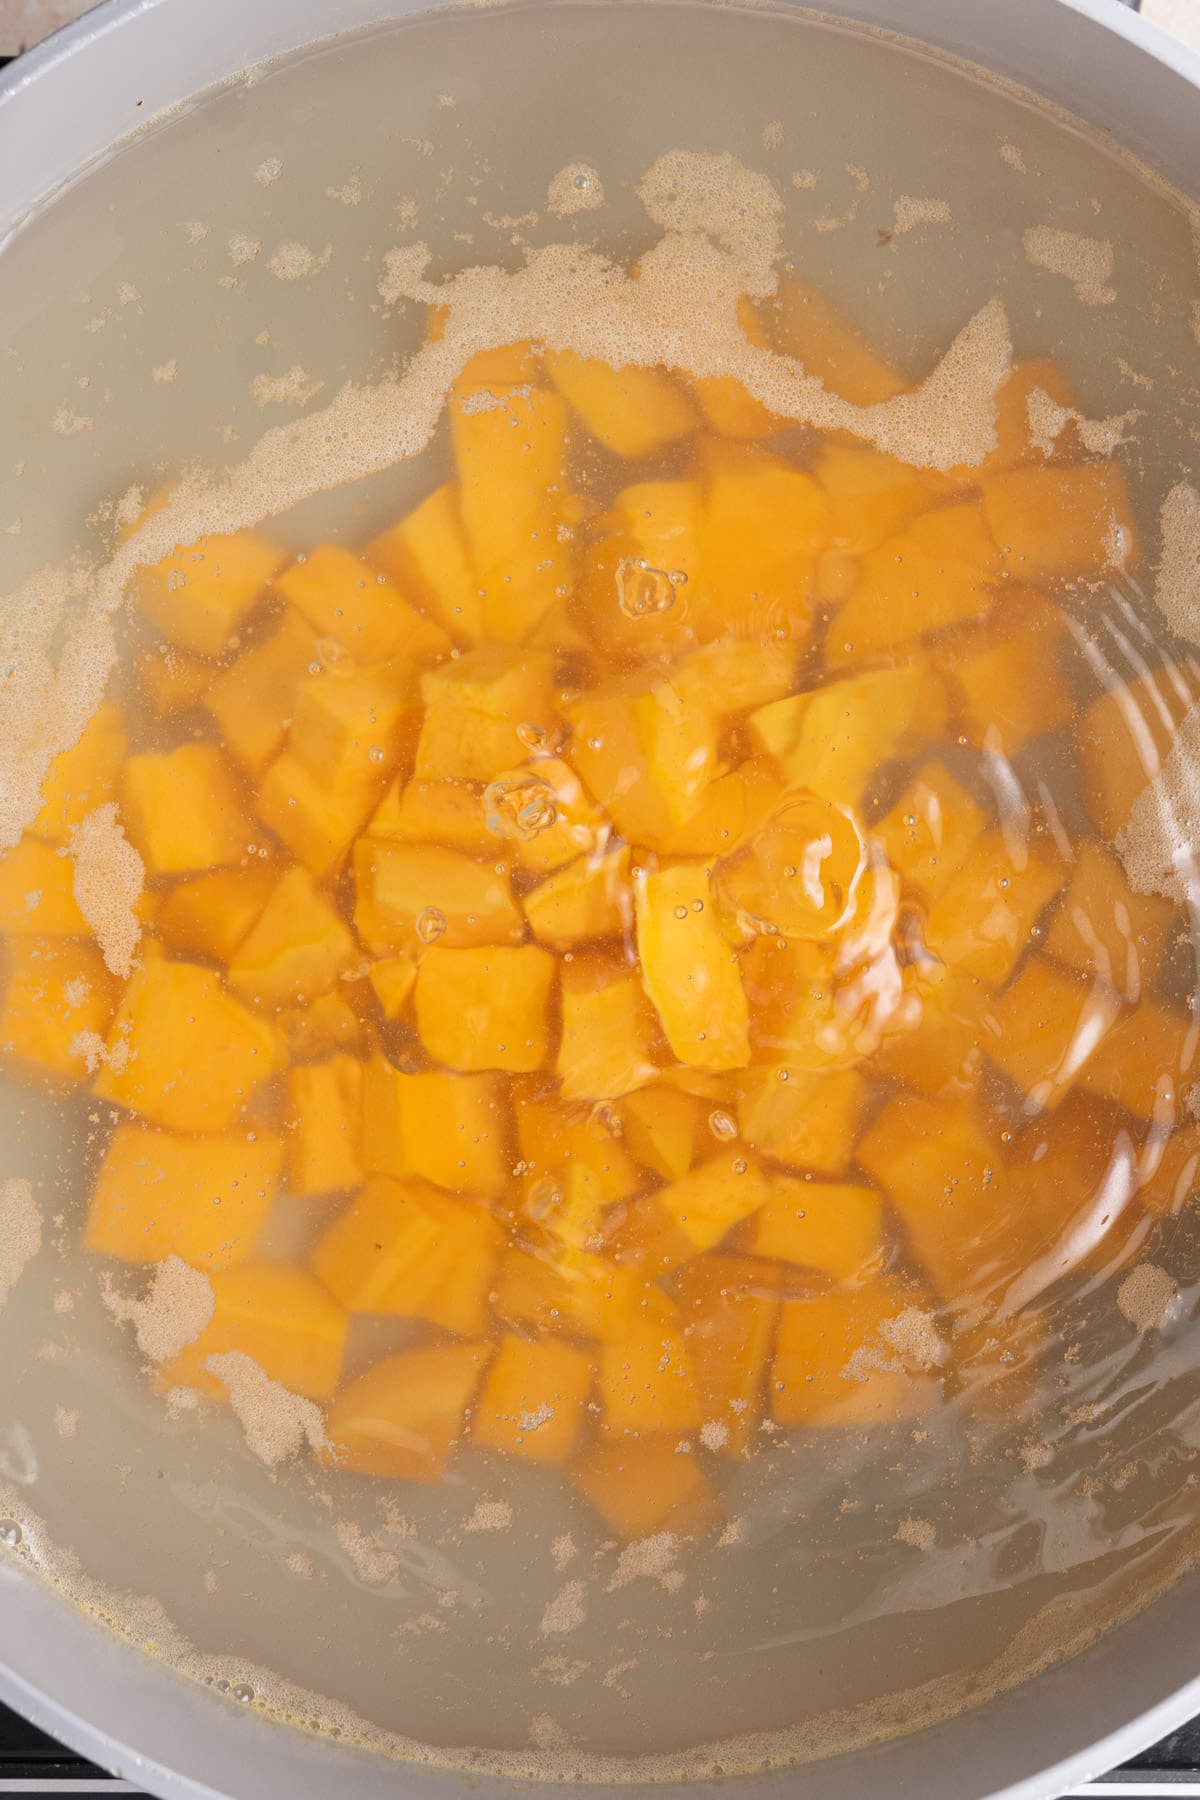 Boiling sweet potato to get it tender to make pie filling.